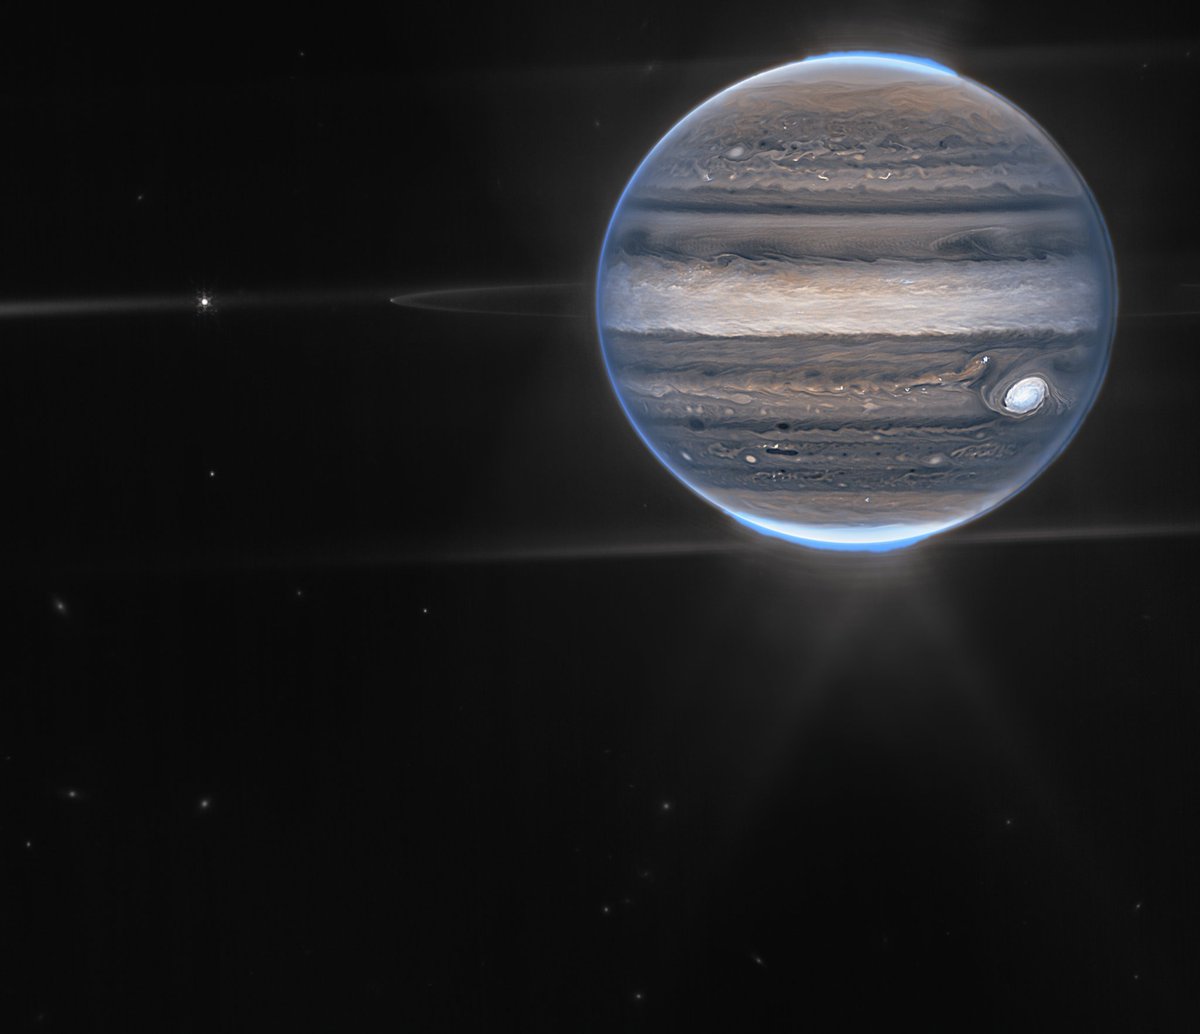 Giant news from a giant planet!

@NASAWebb captured a new view of Jupiter in infrared light, uncovering clues to the planet’s inner life. Two moons, rings, and distant galaxies are visible. Get the details: go.nasa.gov/3pErDkC